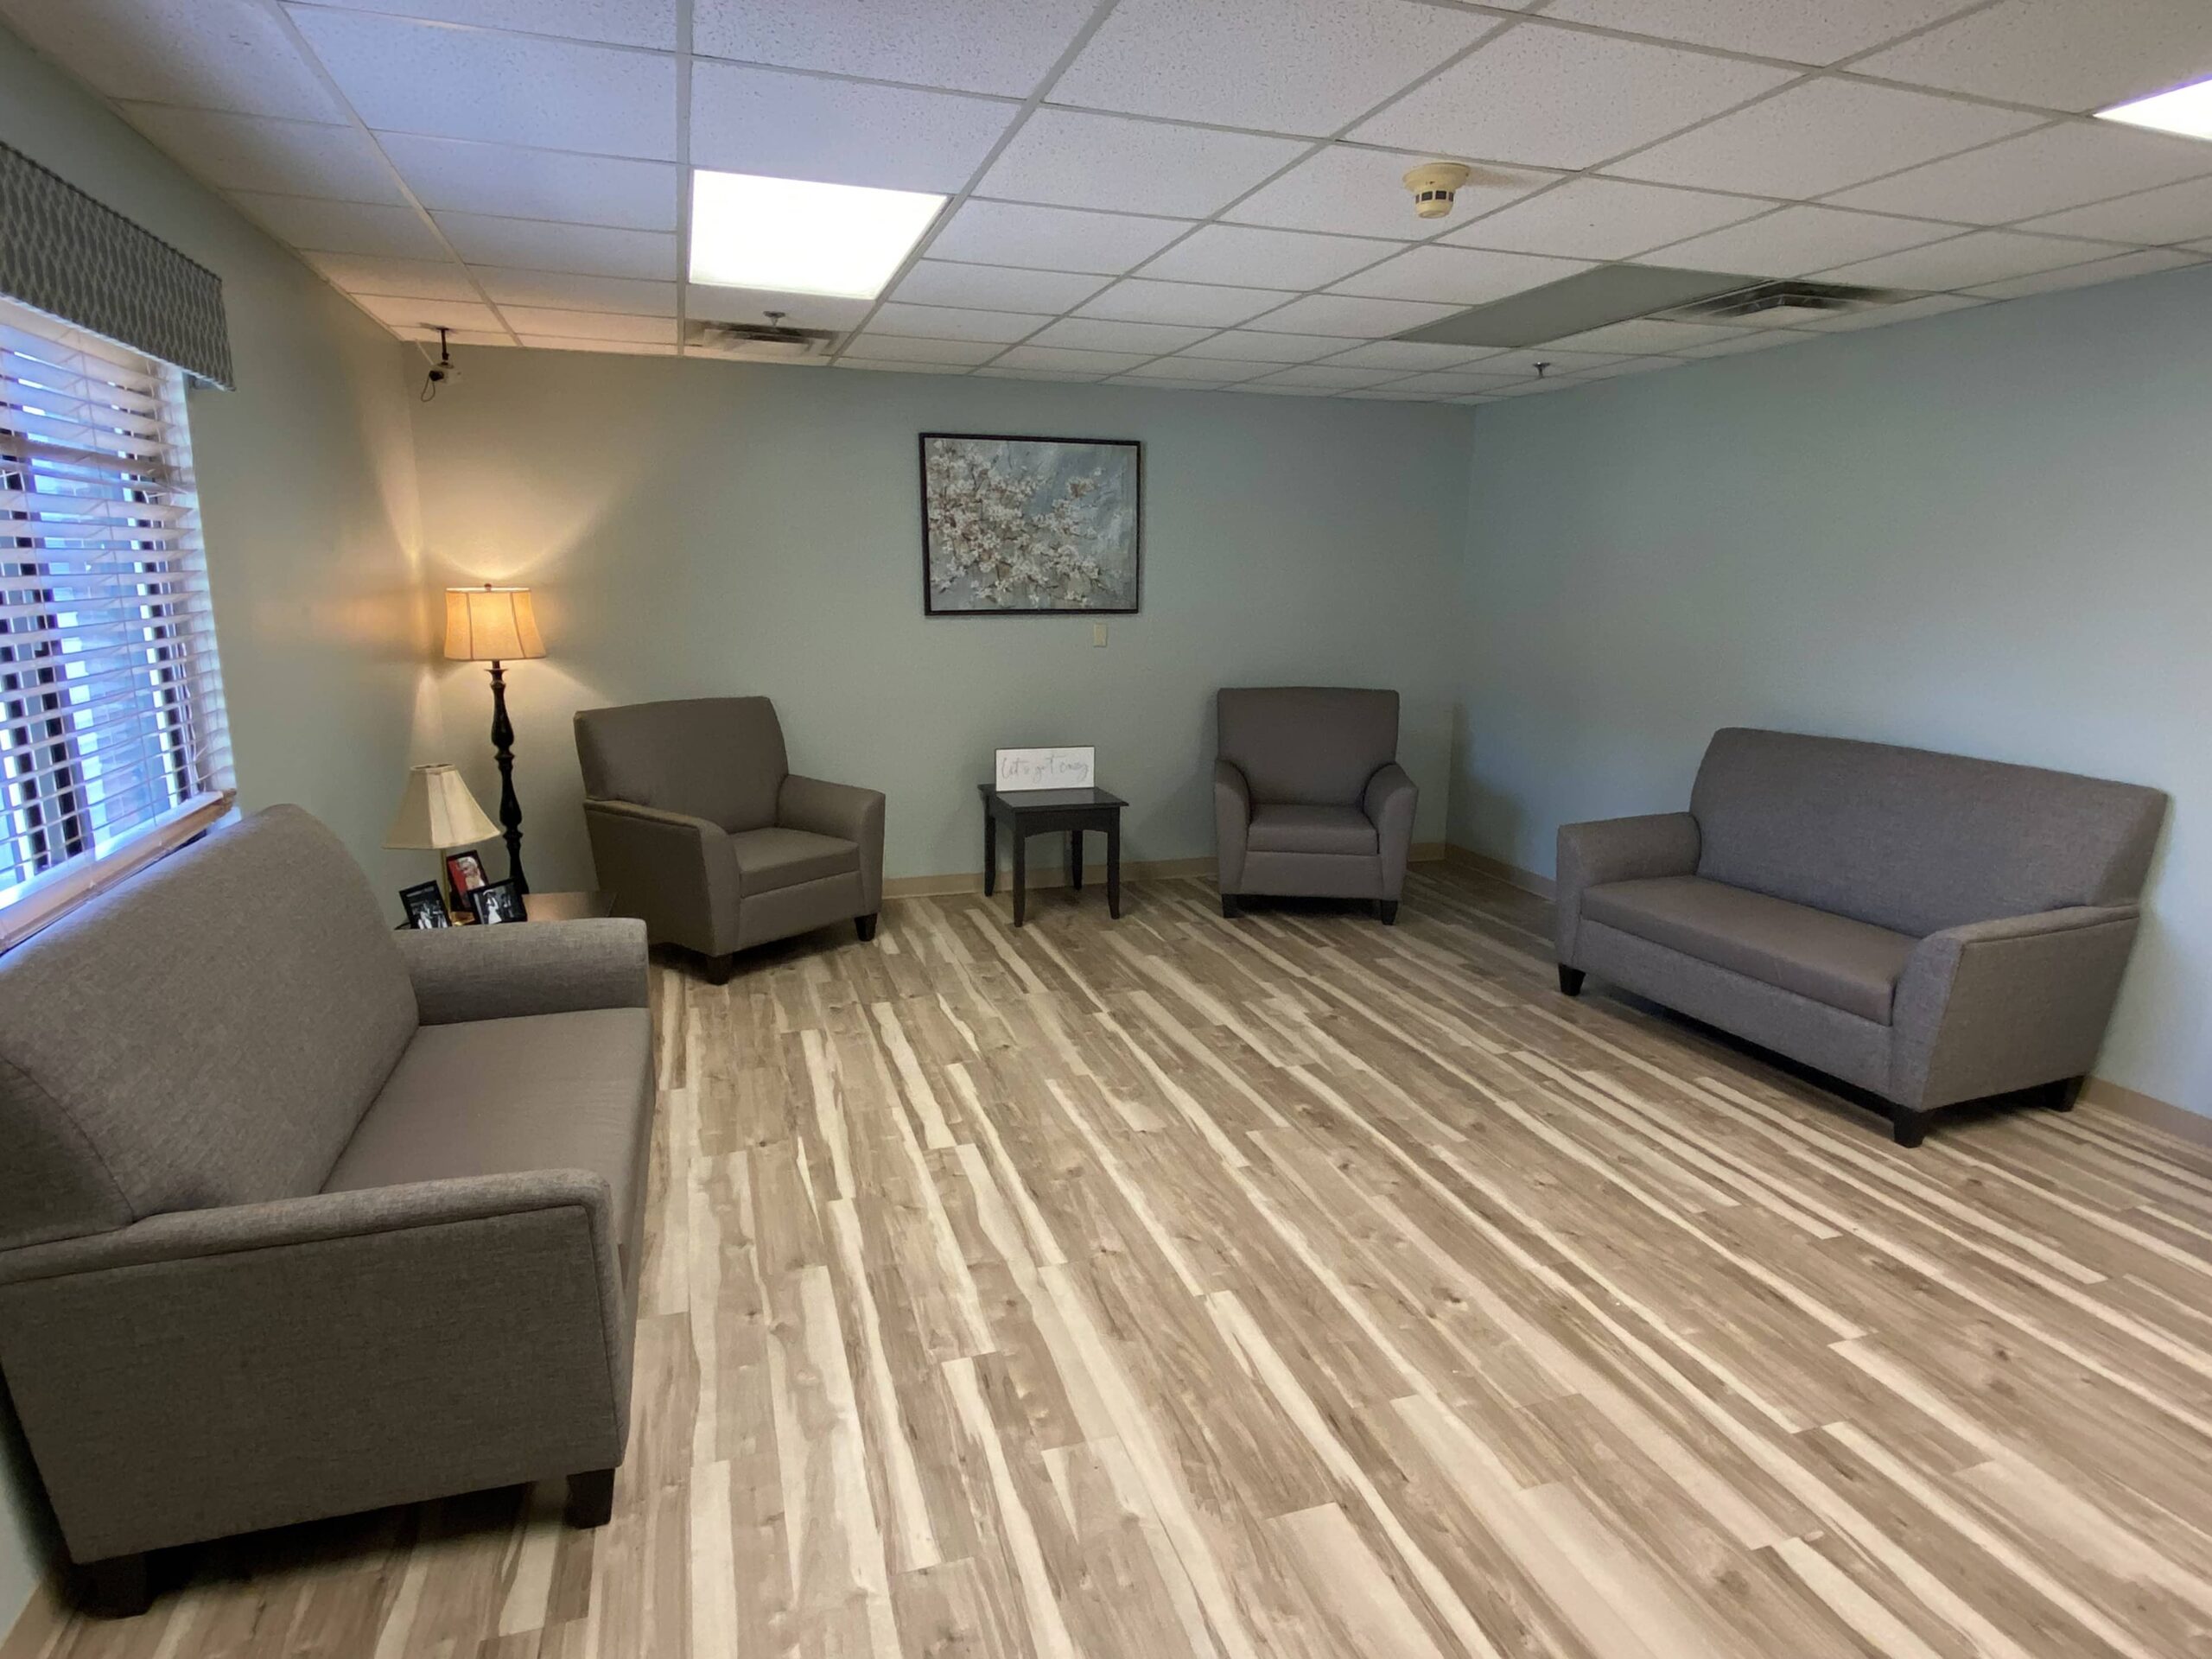 Brickyard Healthcare Brentwood Care Center couches and chairs for residents